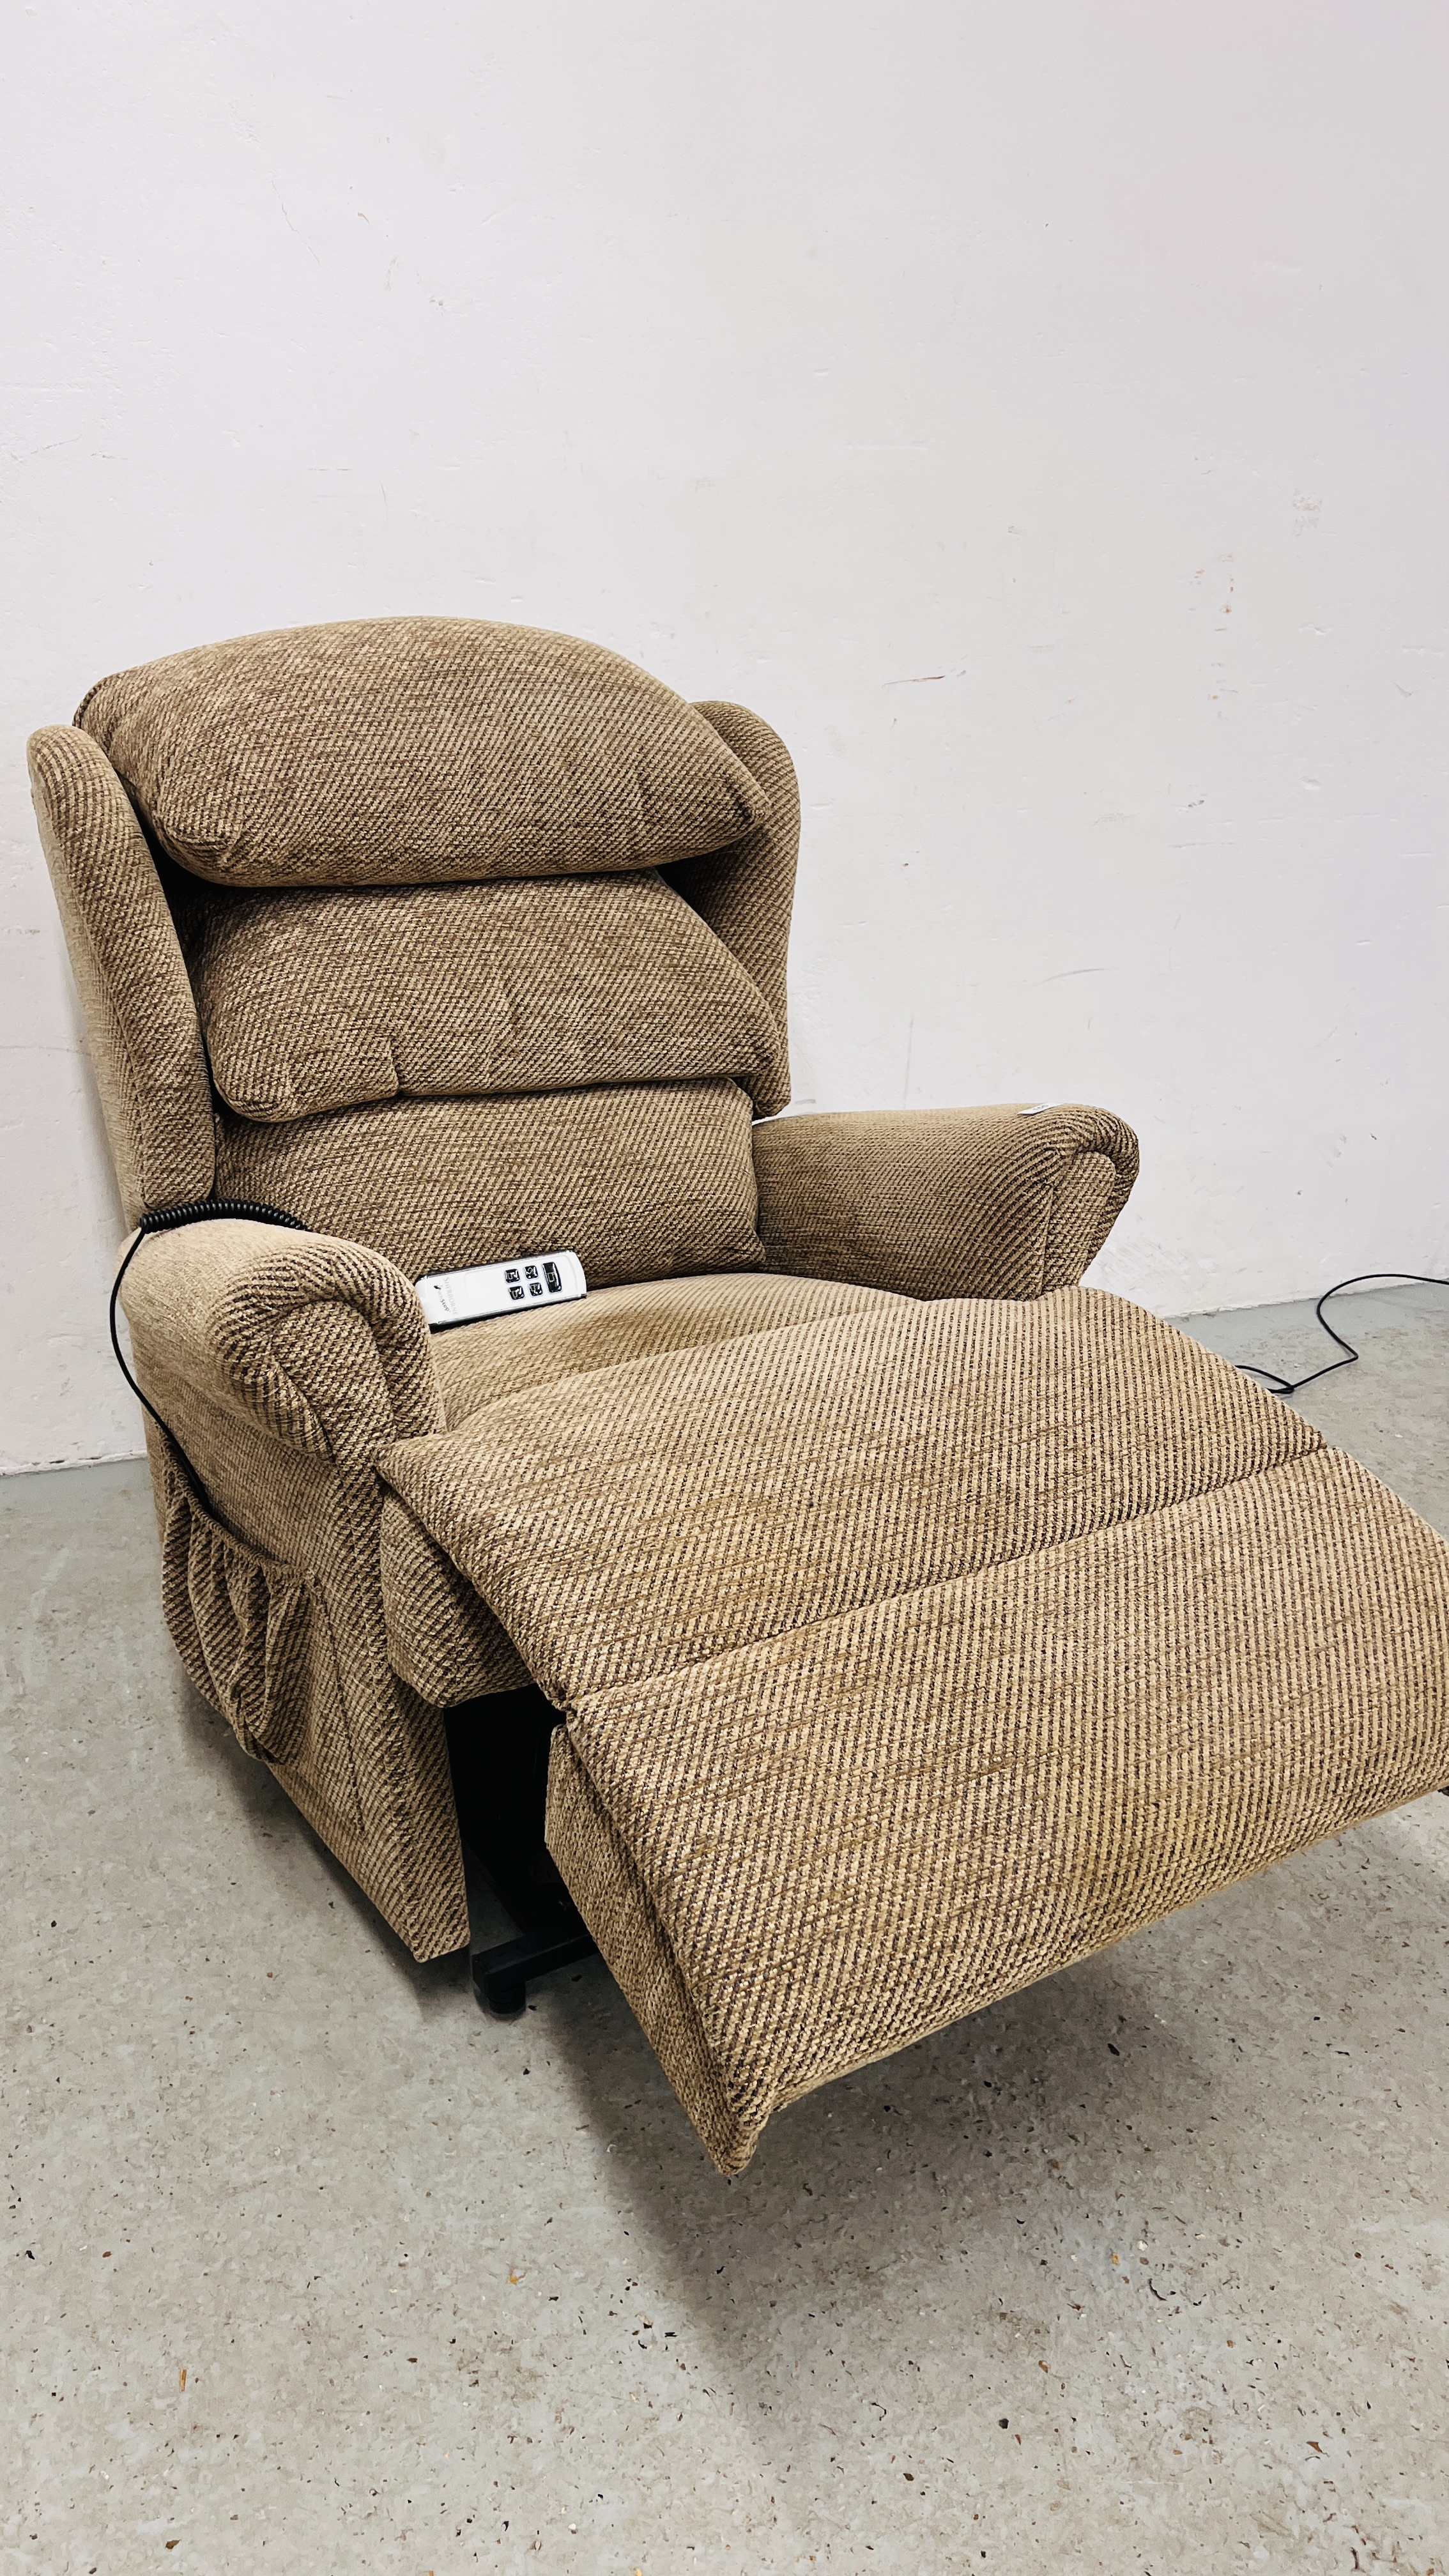 A SHERBORNE T.MOTION OATMEAL UPHOLSTERED ELECTRIC RISE AND RECLINE EASY CHAIR - SOLD AS SEEN. - Image 9 of 11